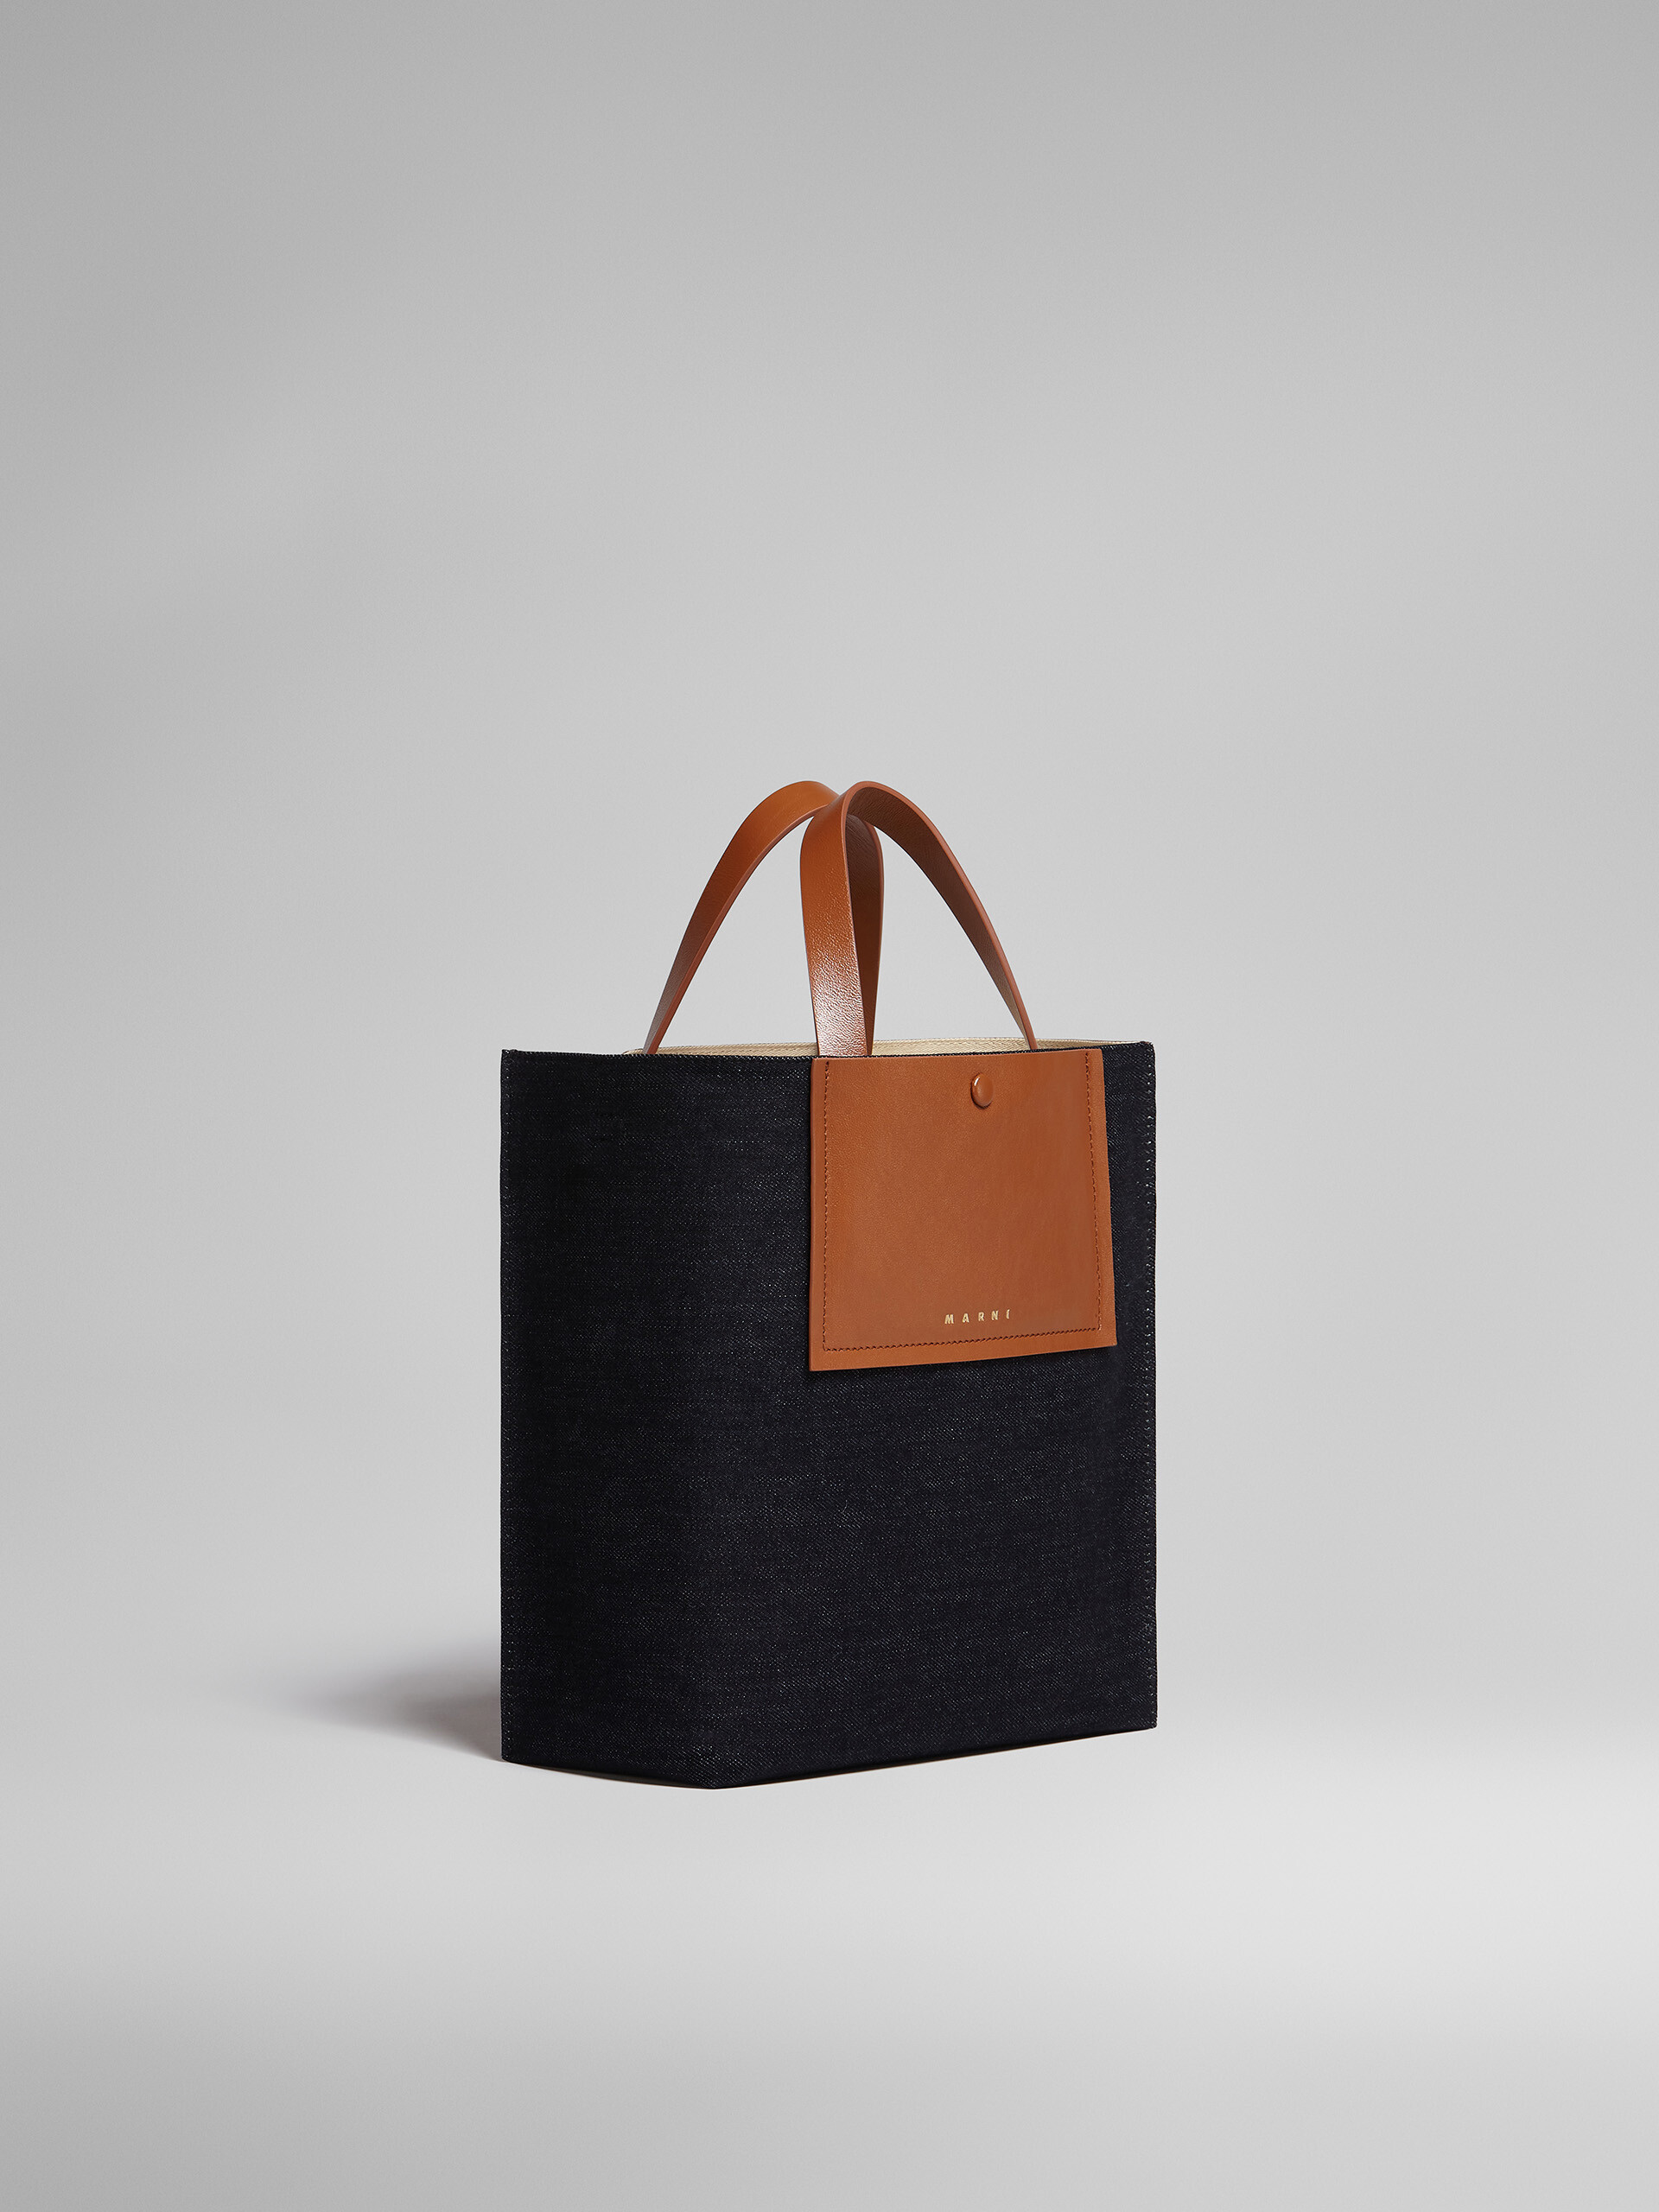 MUSEO SOFT large bag in denim and leather - Shopping Bags - Image 6